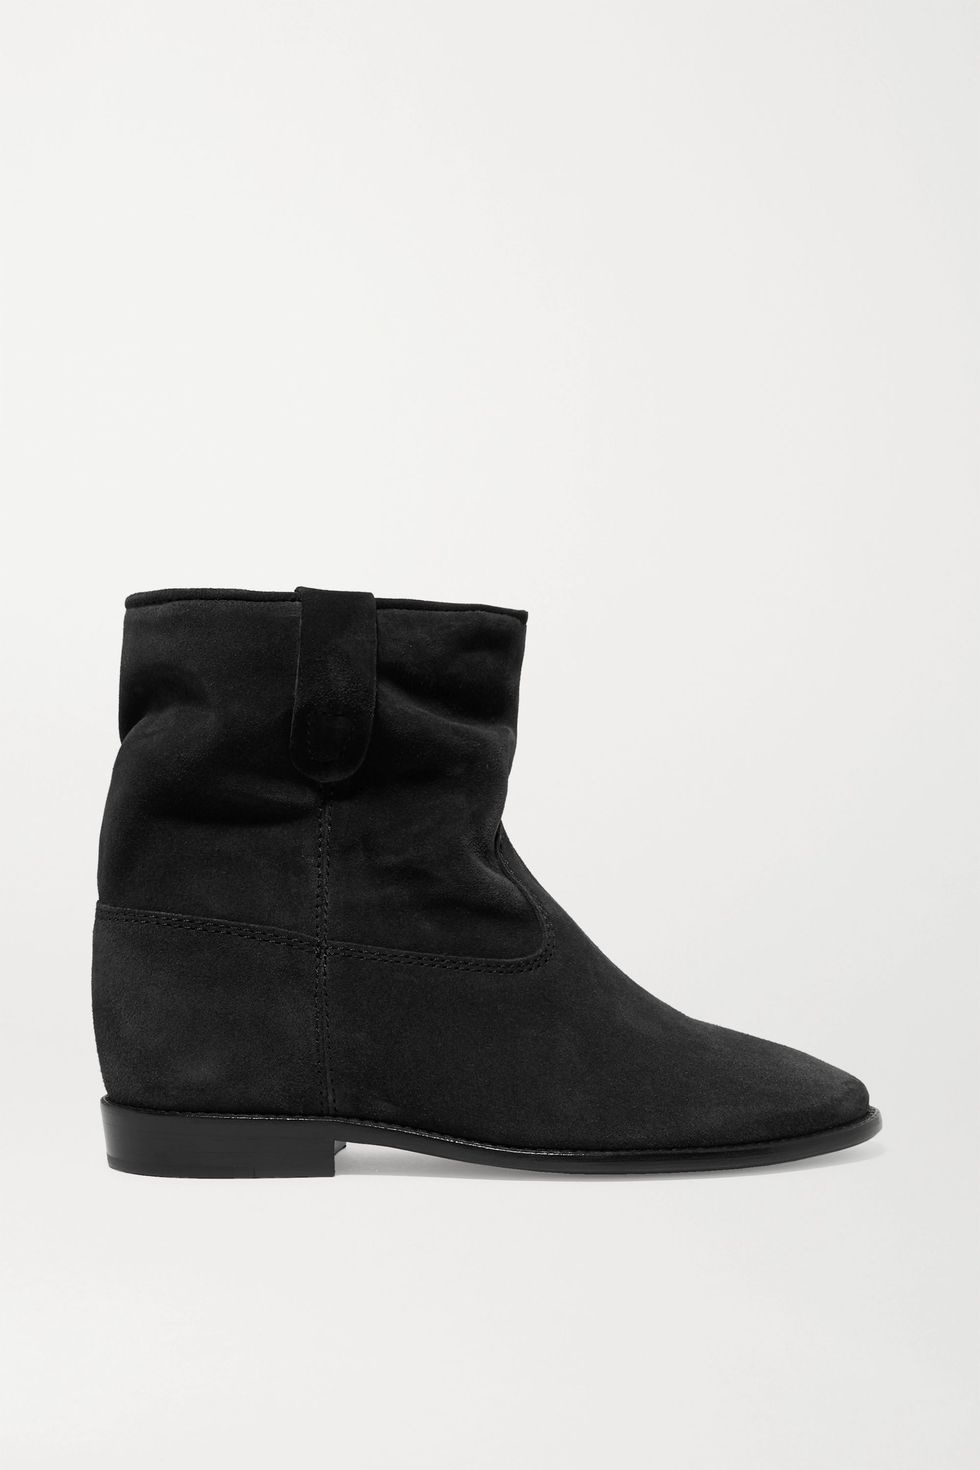 Crisi suede ankle boots